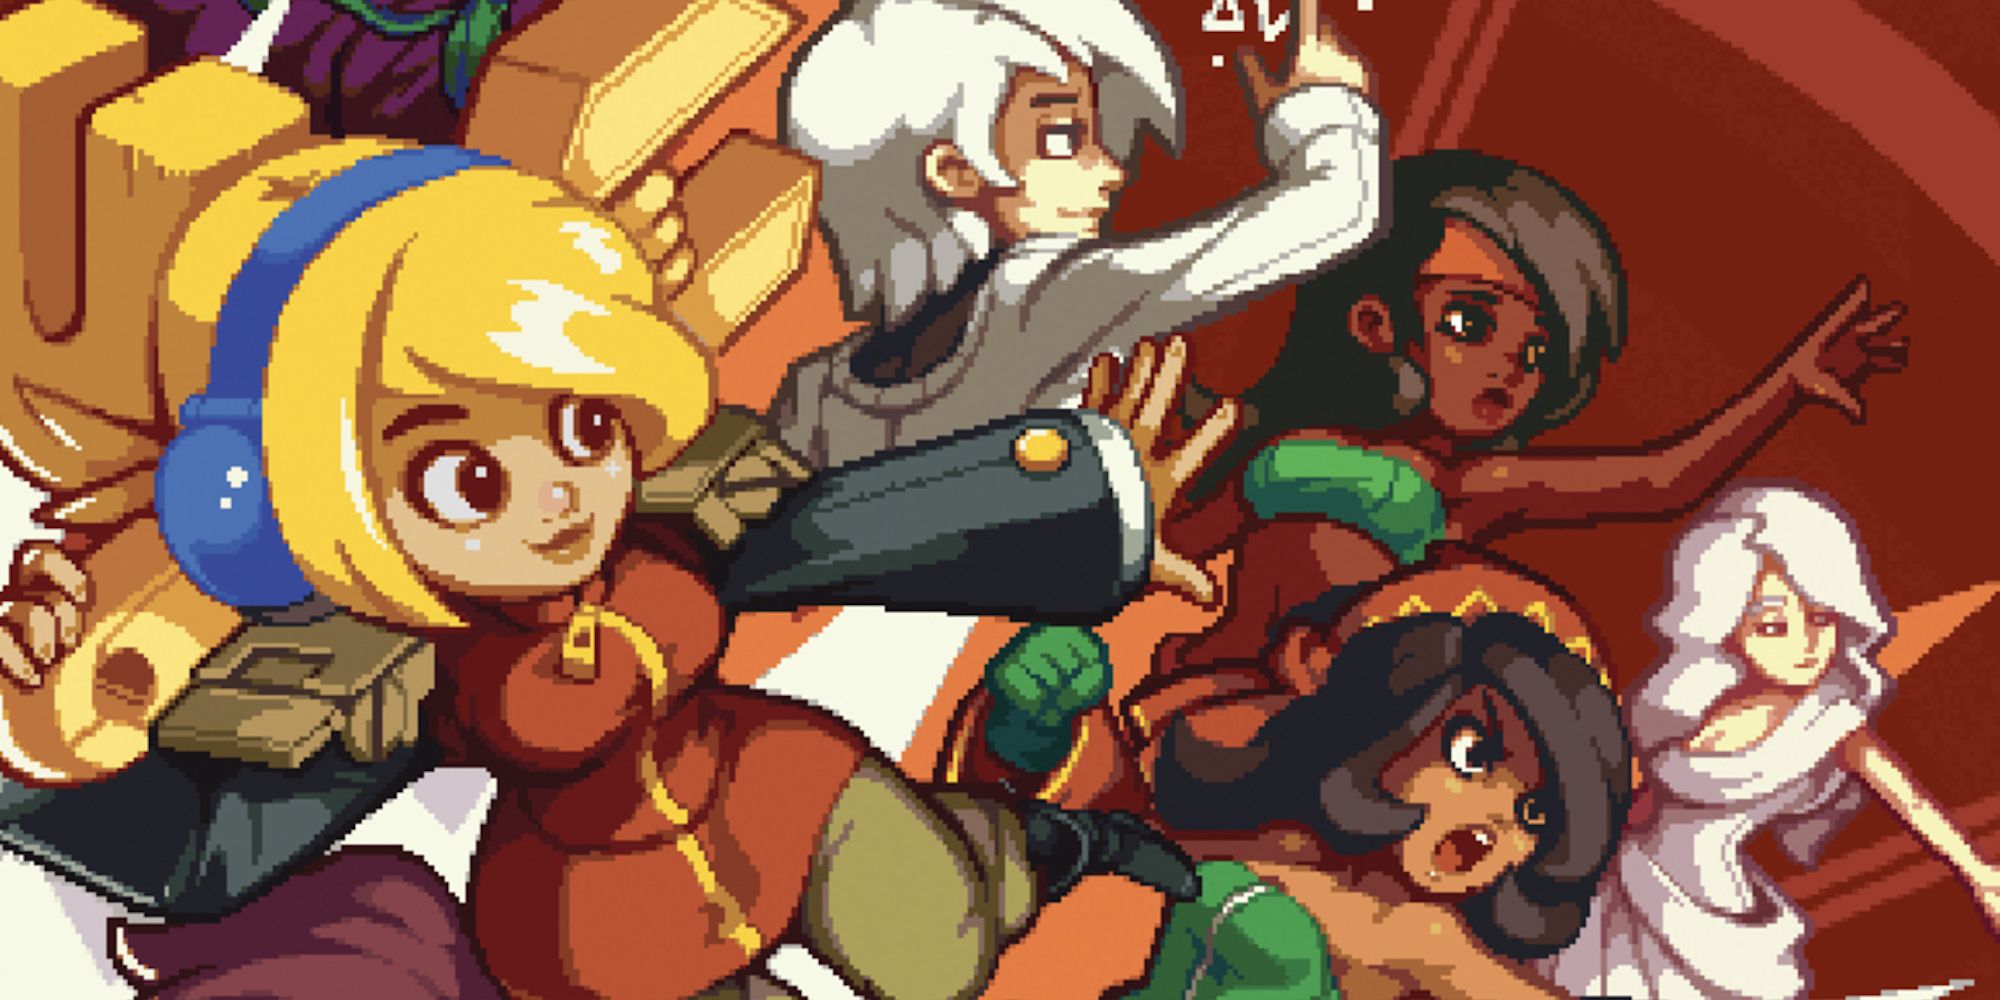 Promo art featuring characters  from Iconoclasts